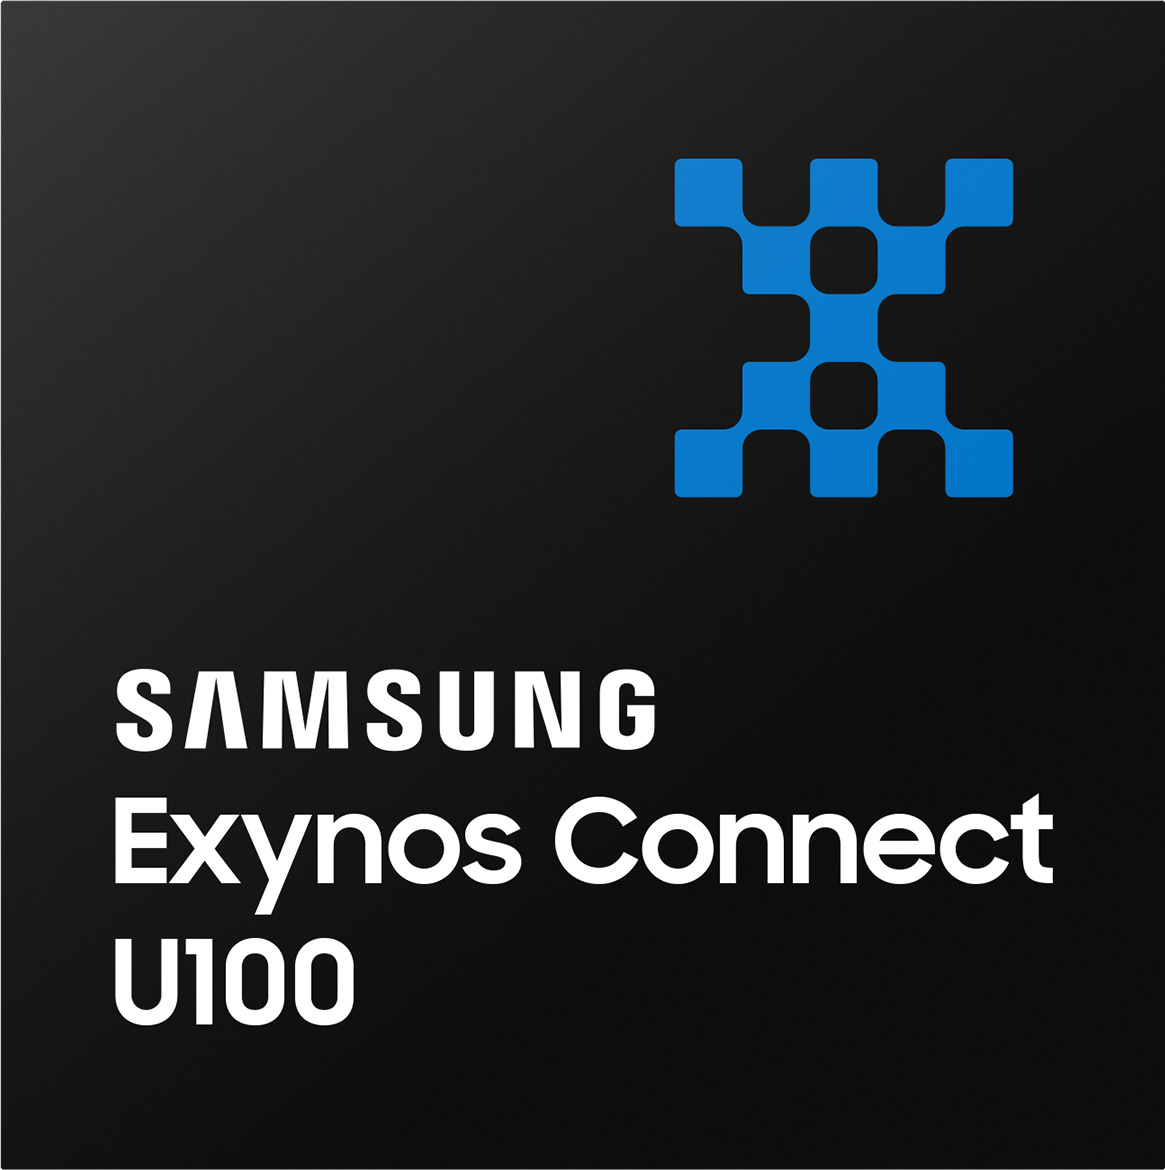 Samsung unveils first ultra-wideband chipset for mobile, automotive and IoT devices